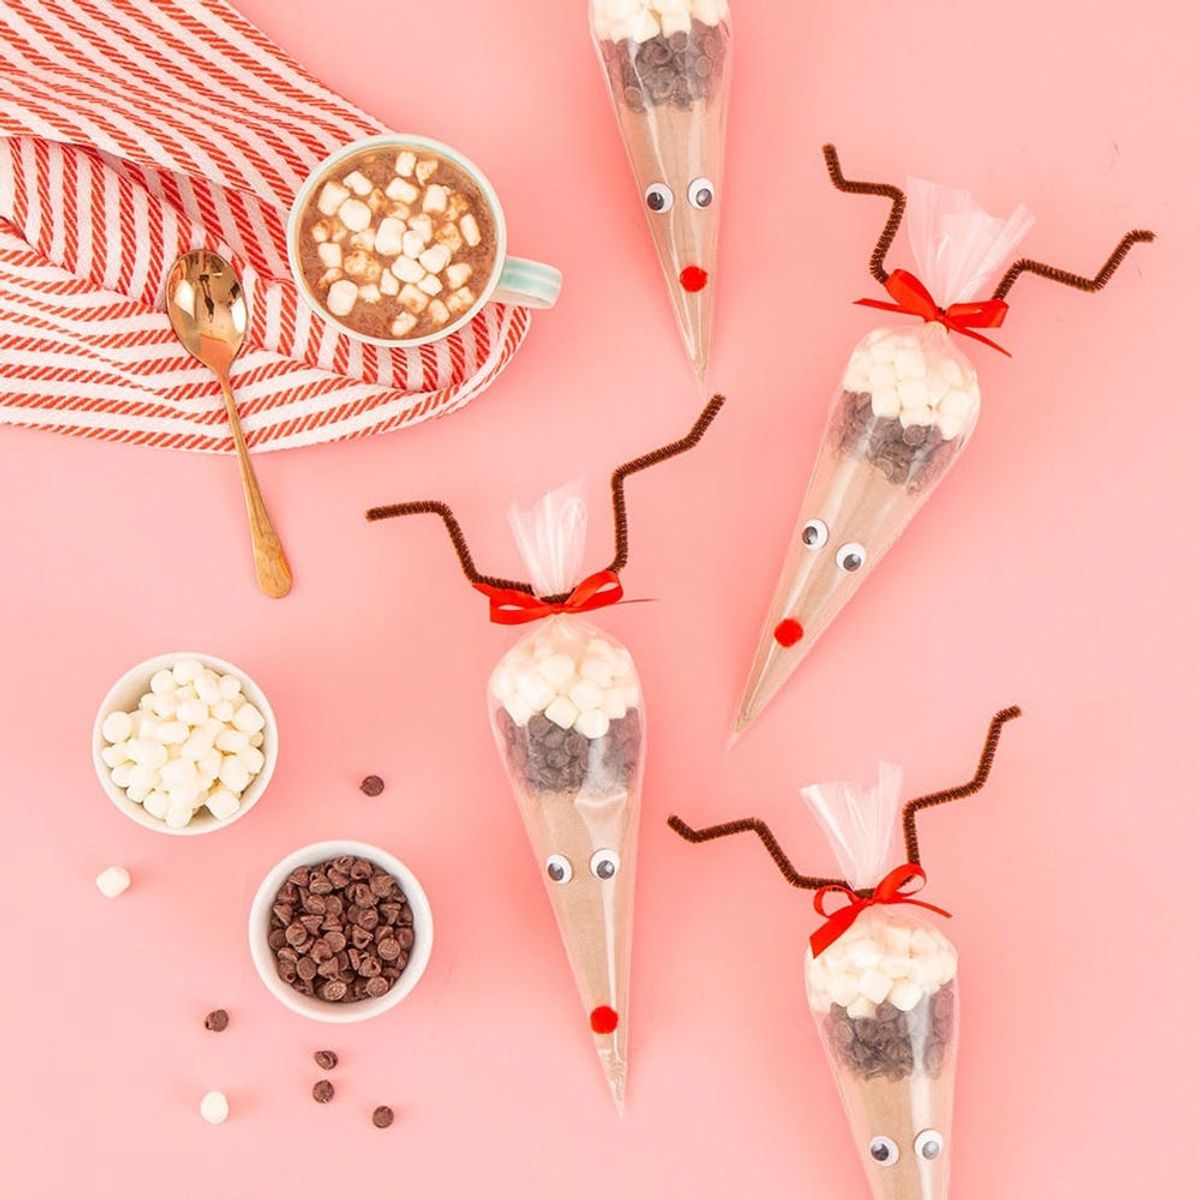 6 DIYs for an Adorable and Affordable Holiday Party